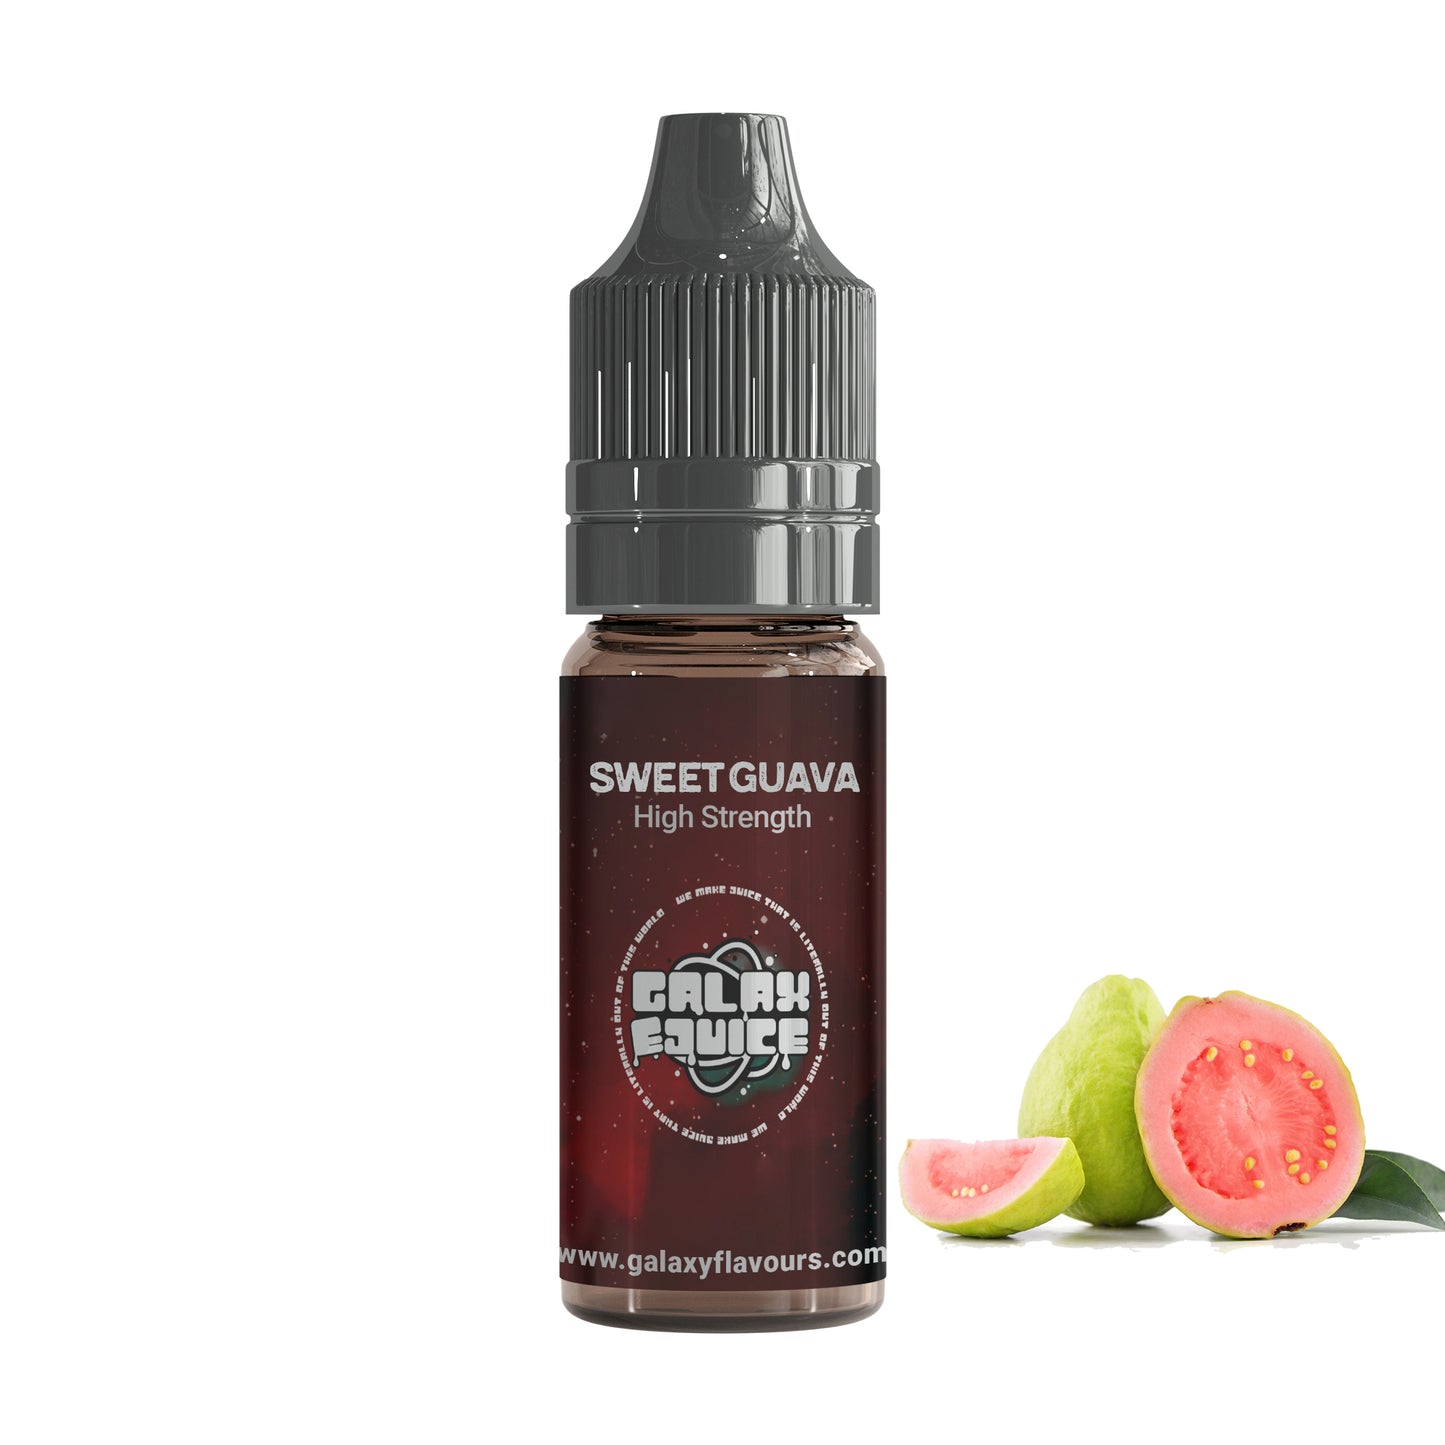 Sweet Guava High Strength Professional Flavouring.